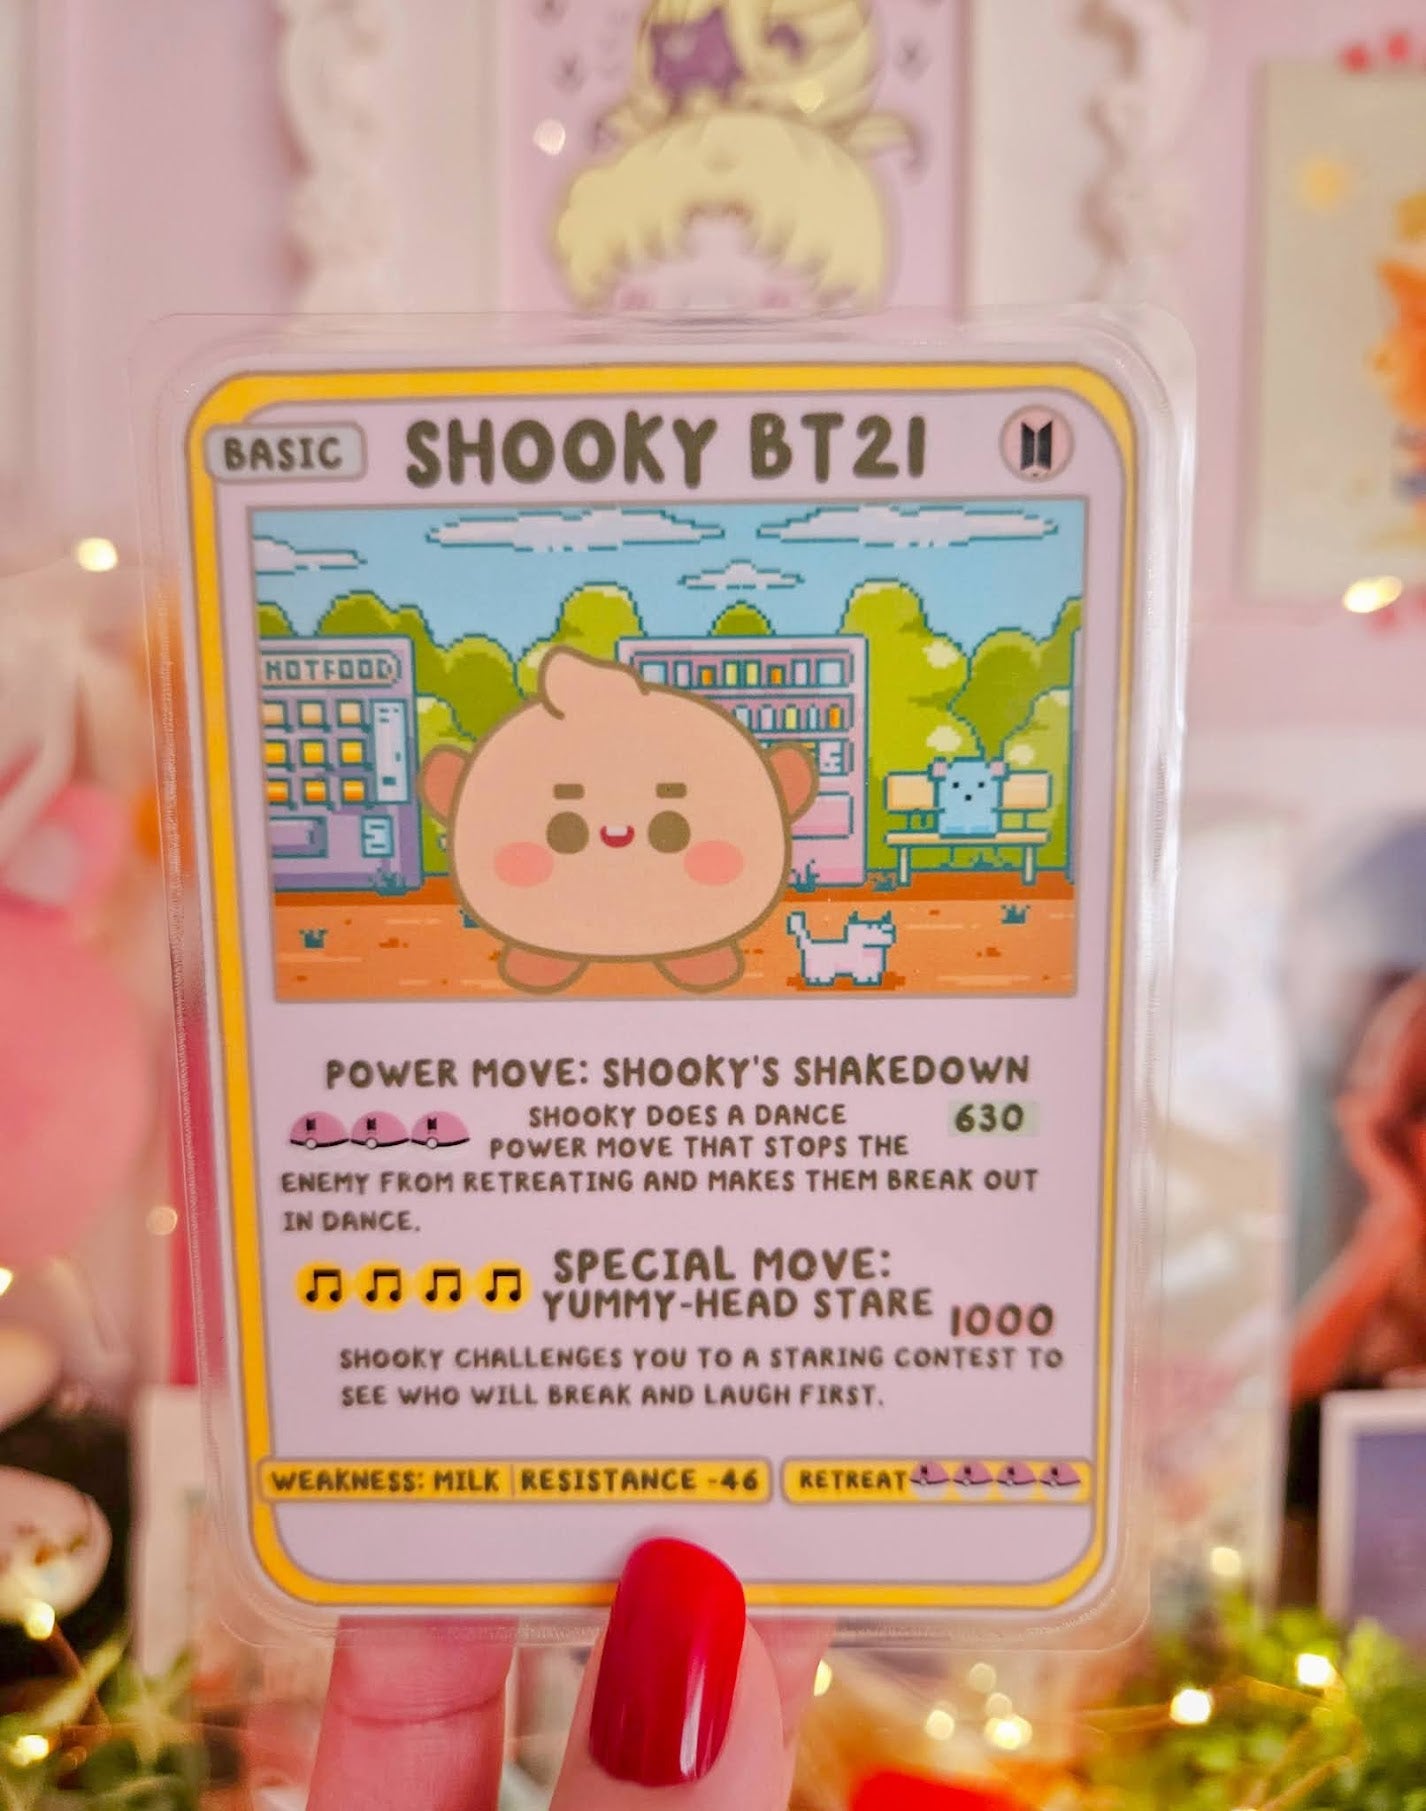 Shooky inspired trading game card